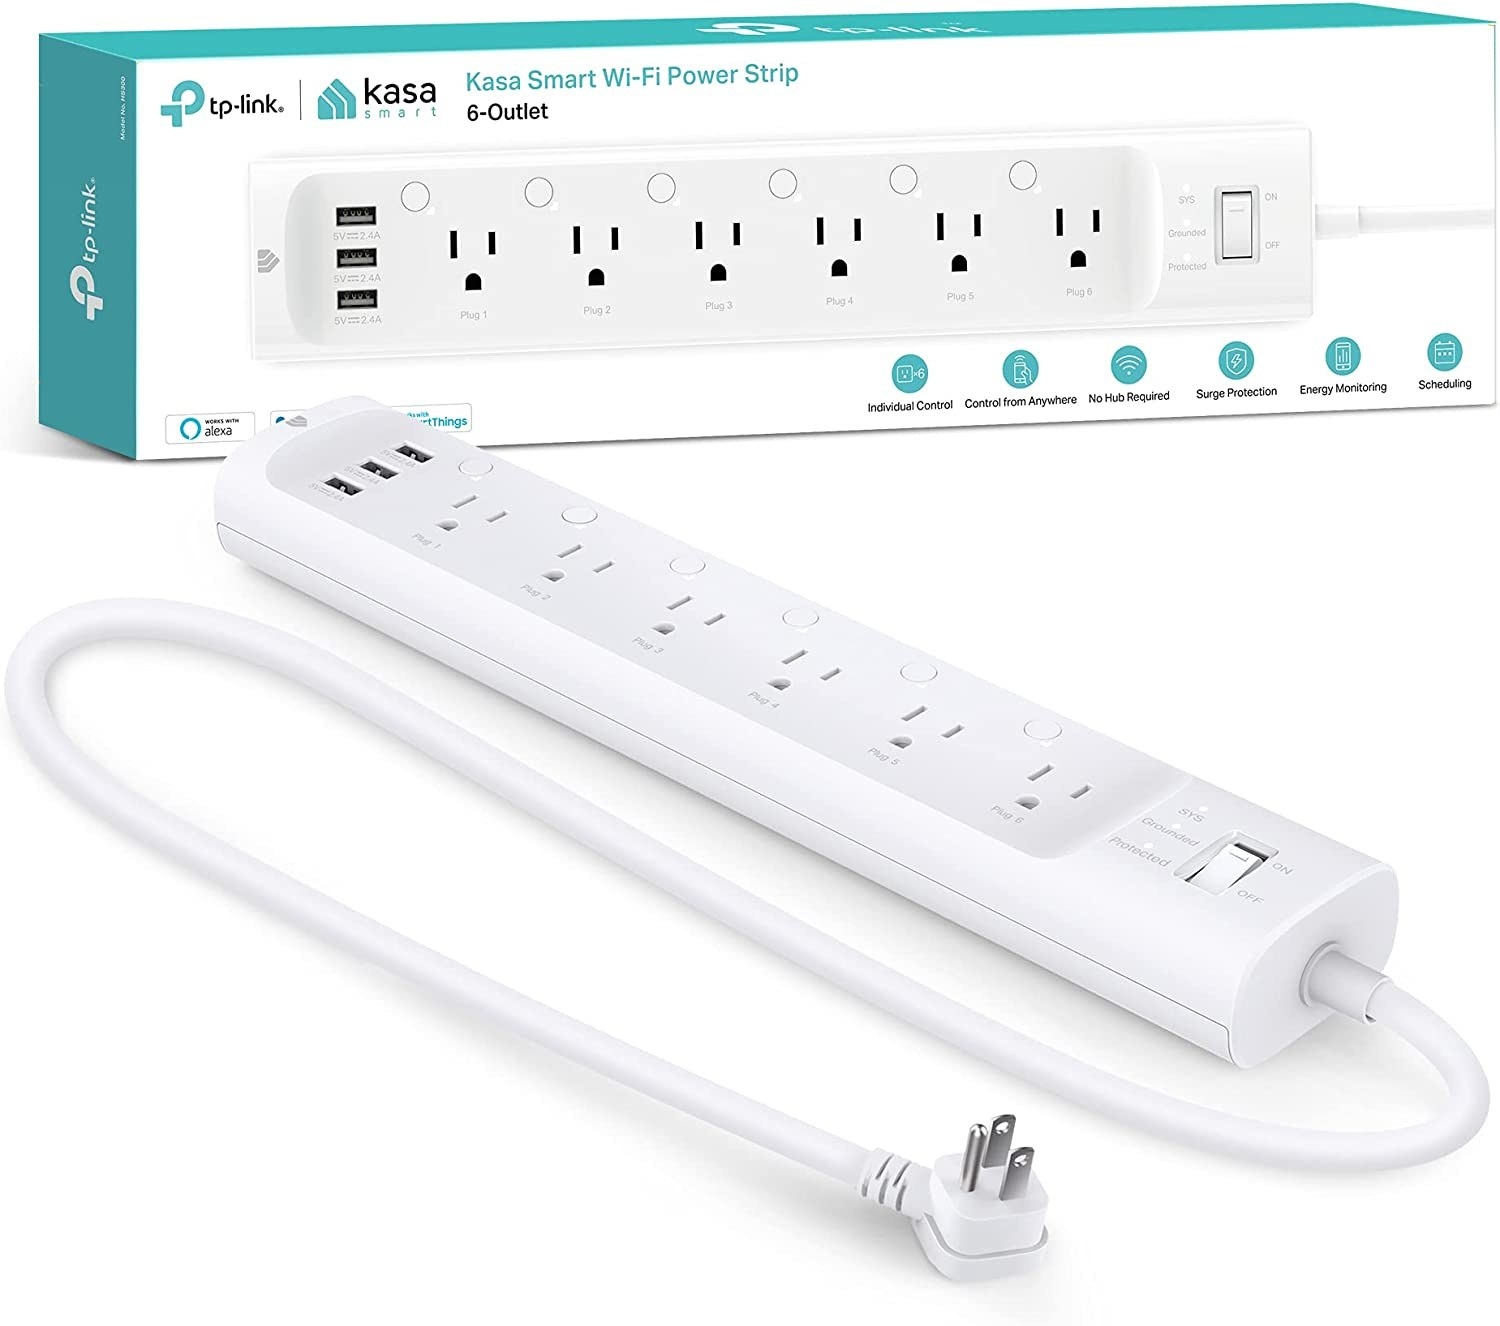 The smart surge protector and packaging is shown